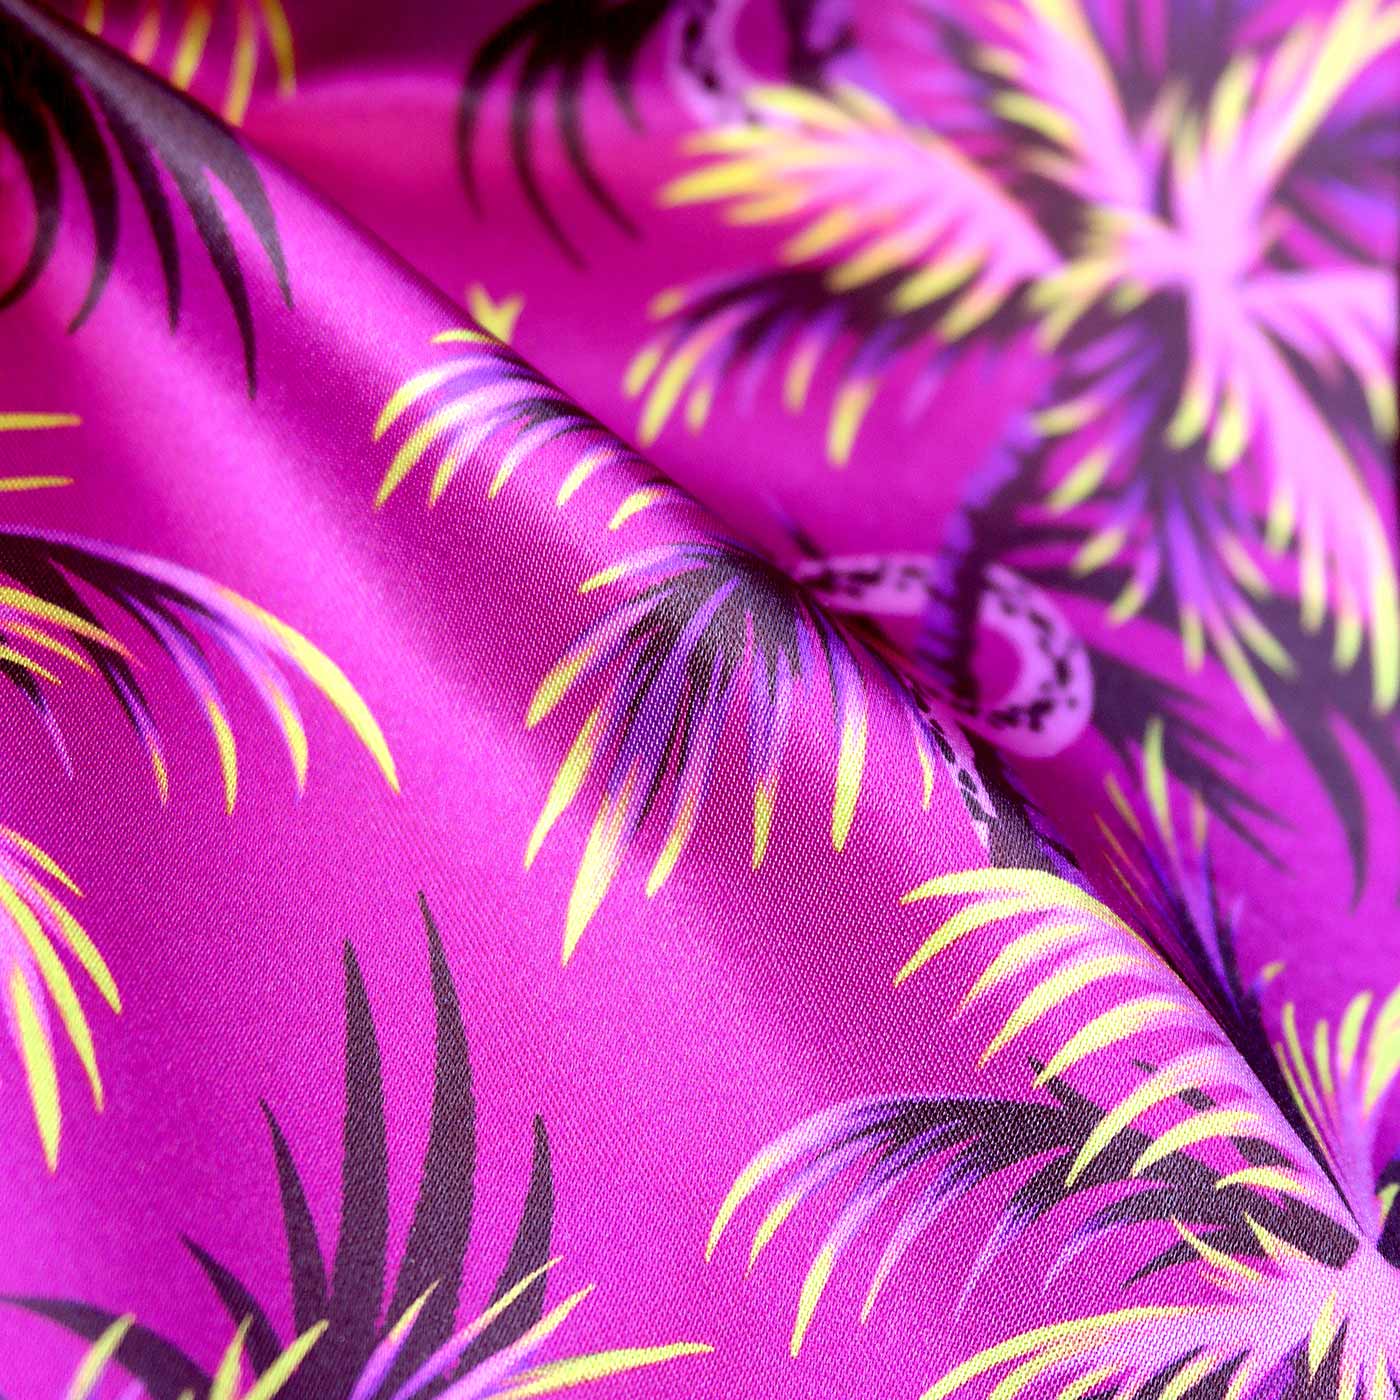 Snakes and palm trees pattern pink fabric by Andrea Muller